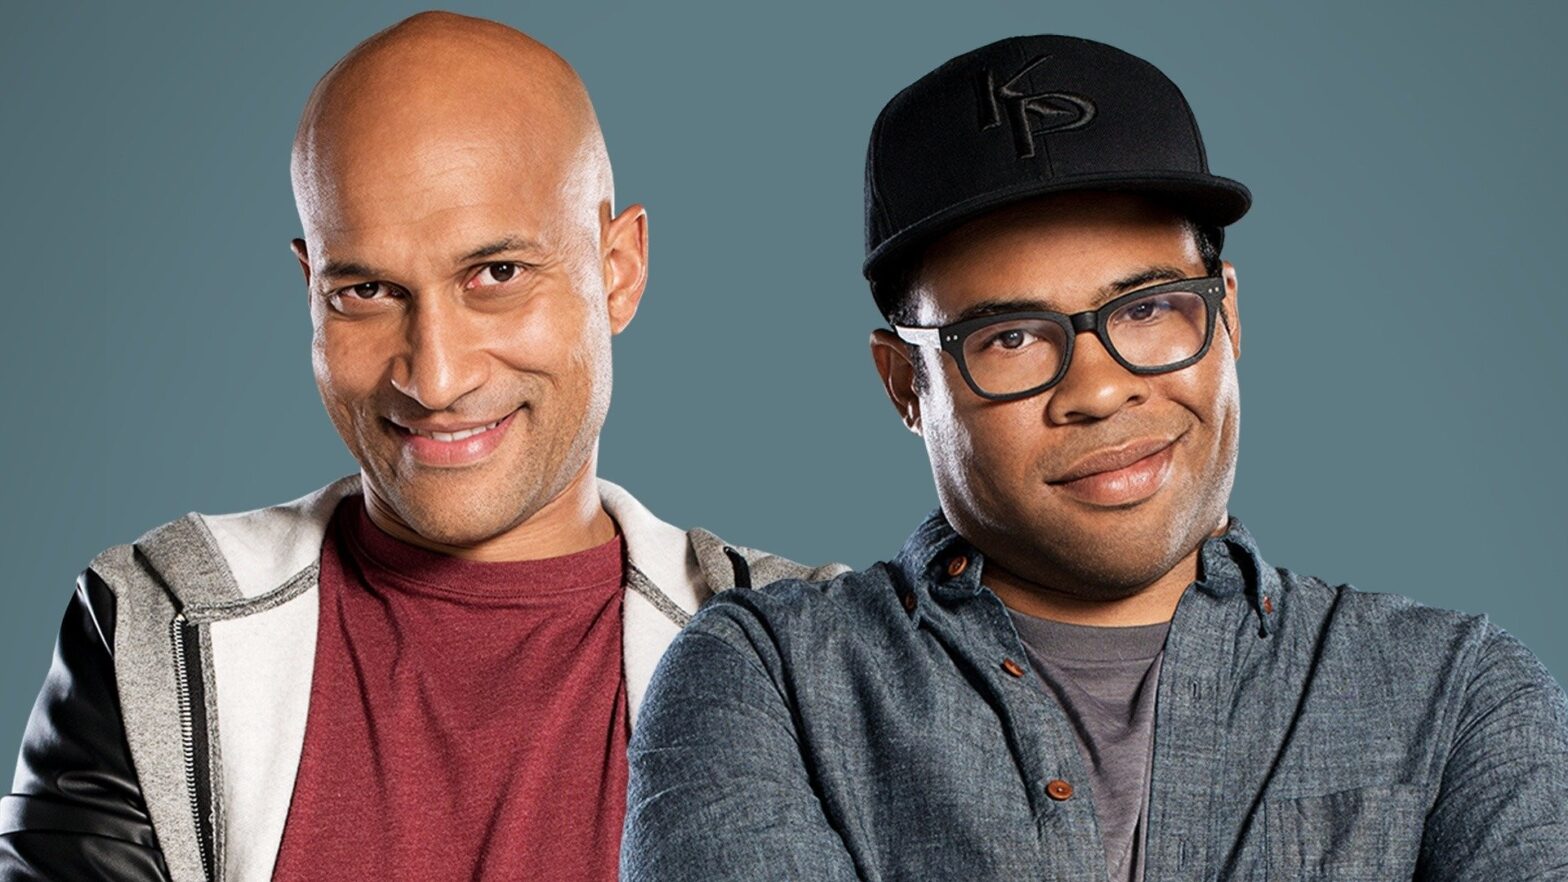 See The Best Key & Peele Character Return To Torment Paramount